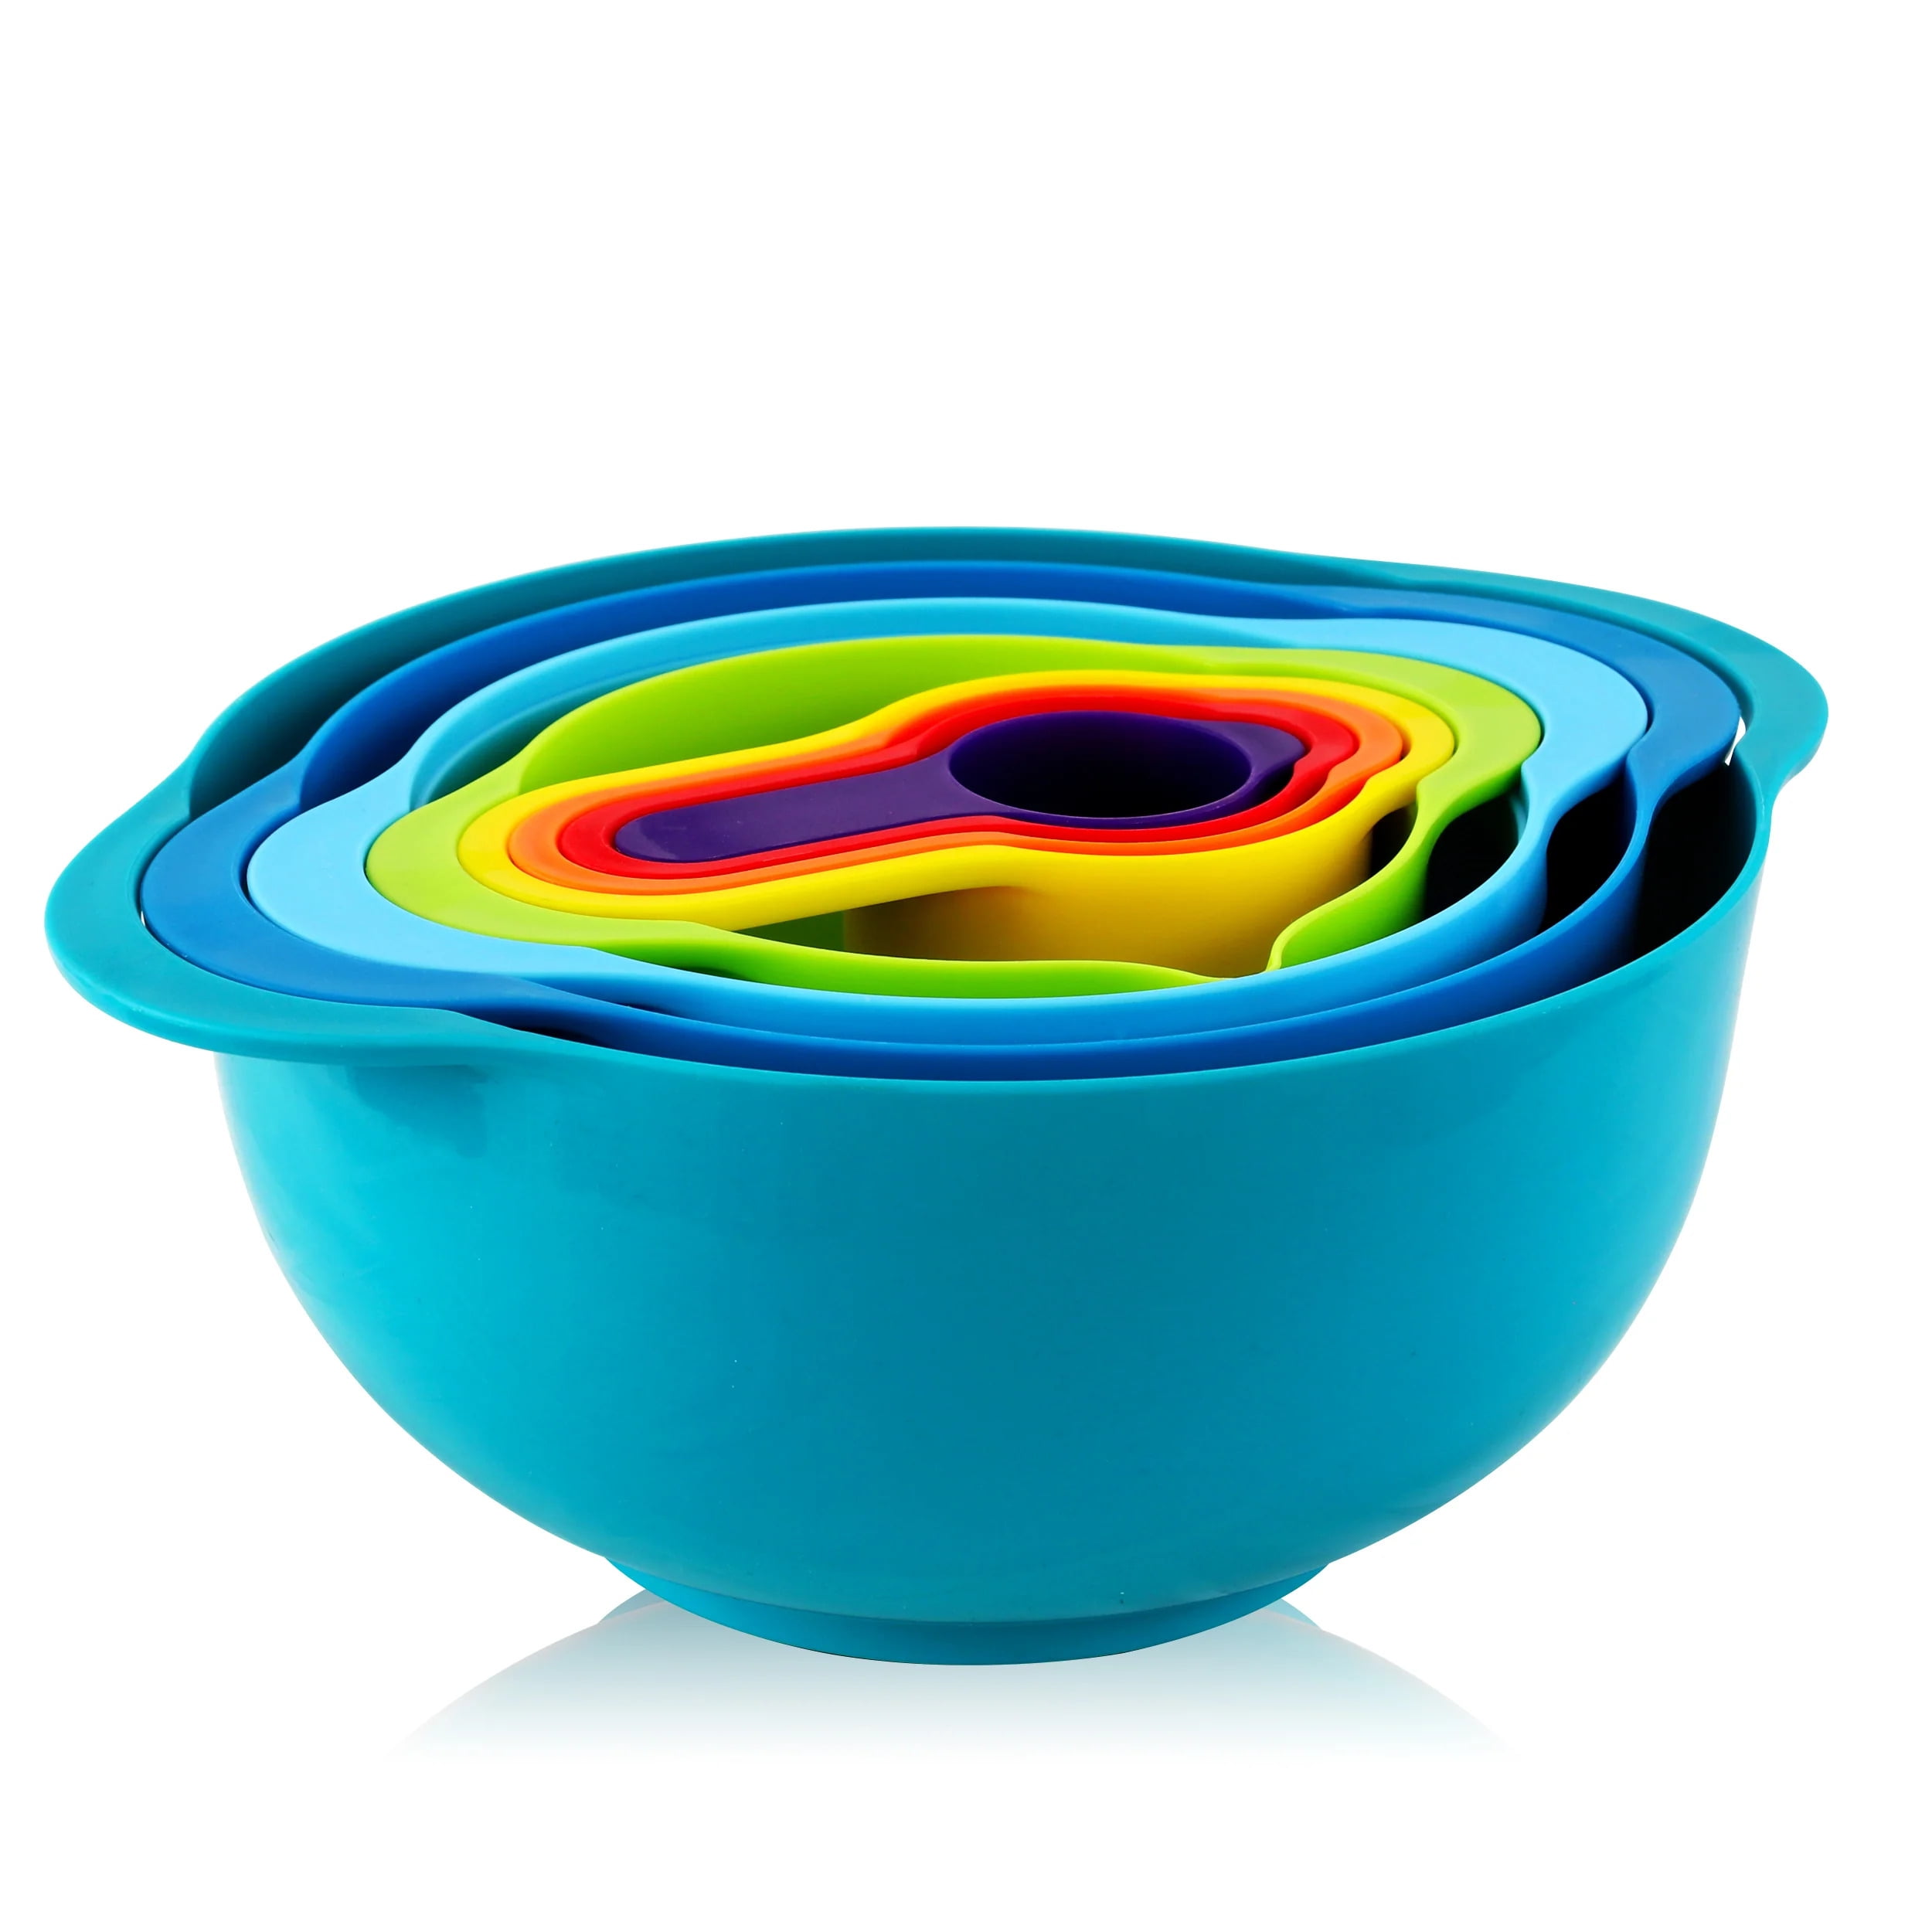 Bowl Shaped Measuring Cups (Set of 4 Sizes)